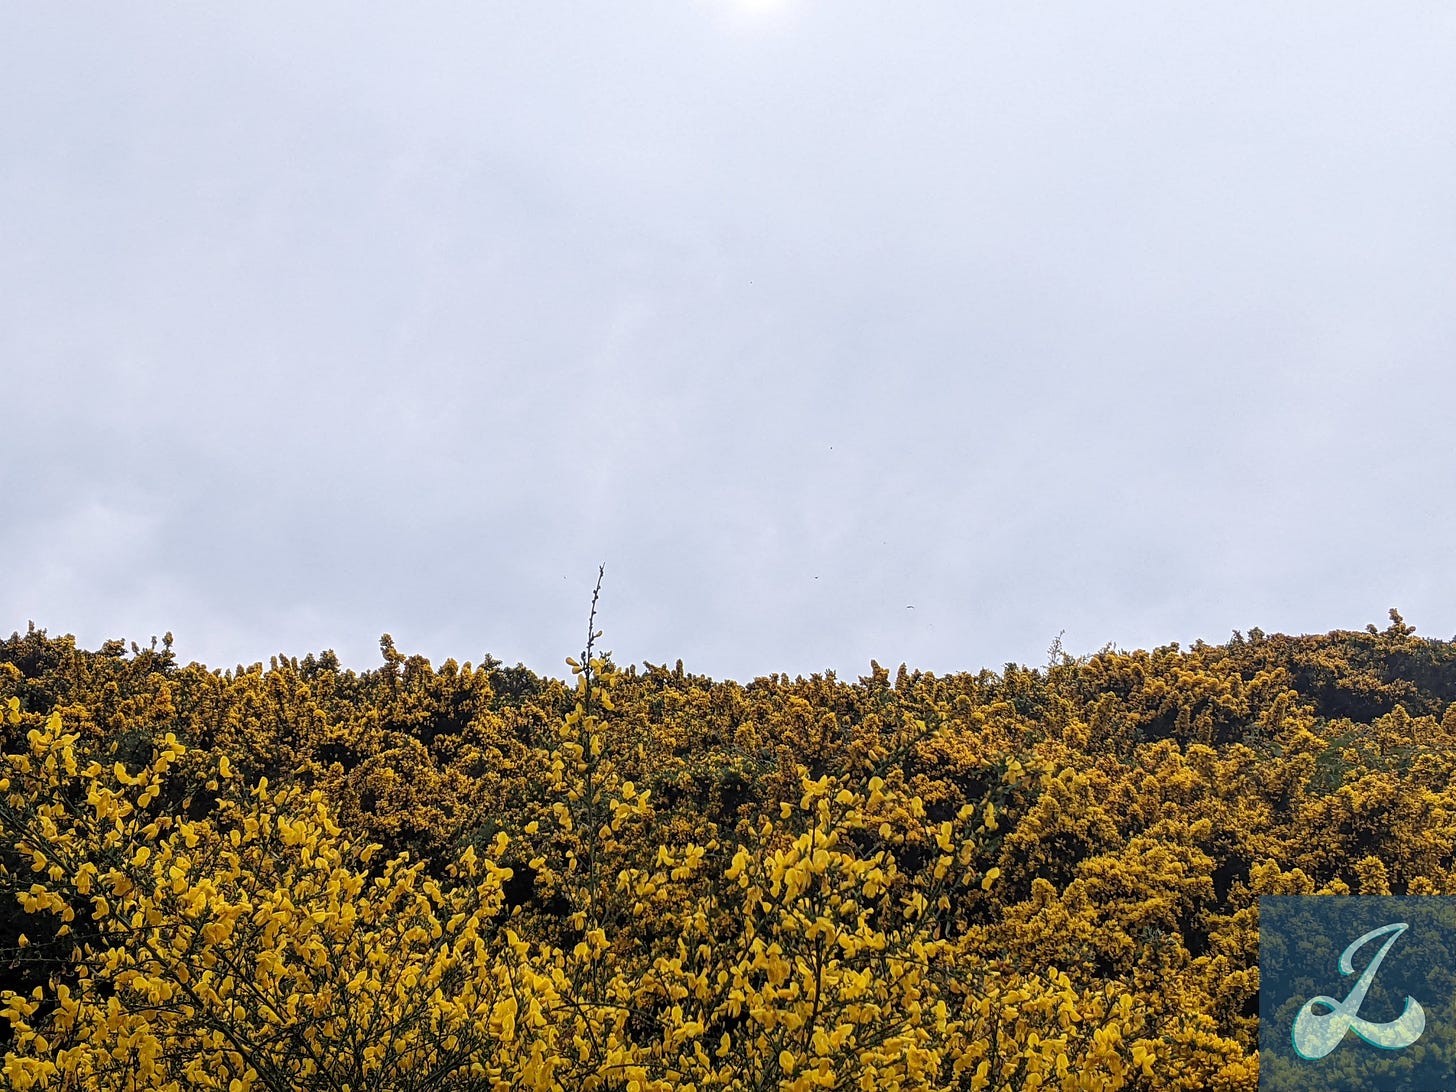 A landscape photo of a thick patch of yellow flowers with spiny stems called gorse on the hillside of Arthur’s Seat in Edinburgh, Scotland. Above the flowers is a gray sky.